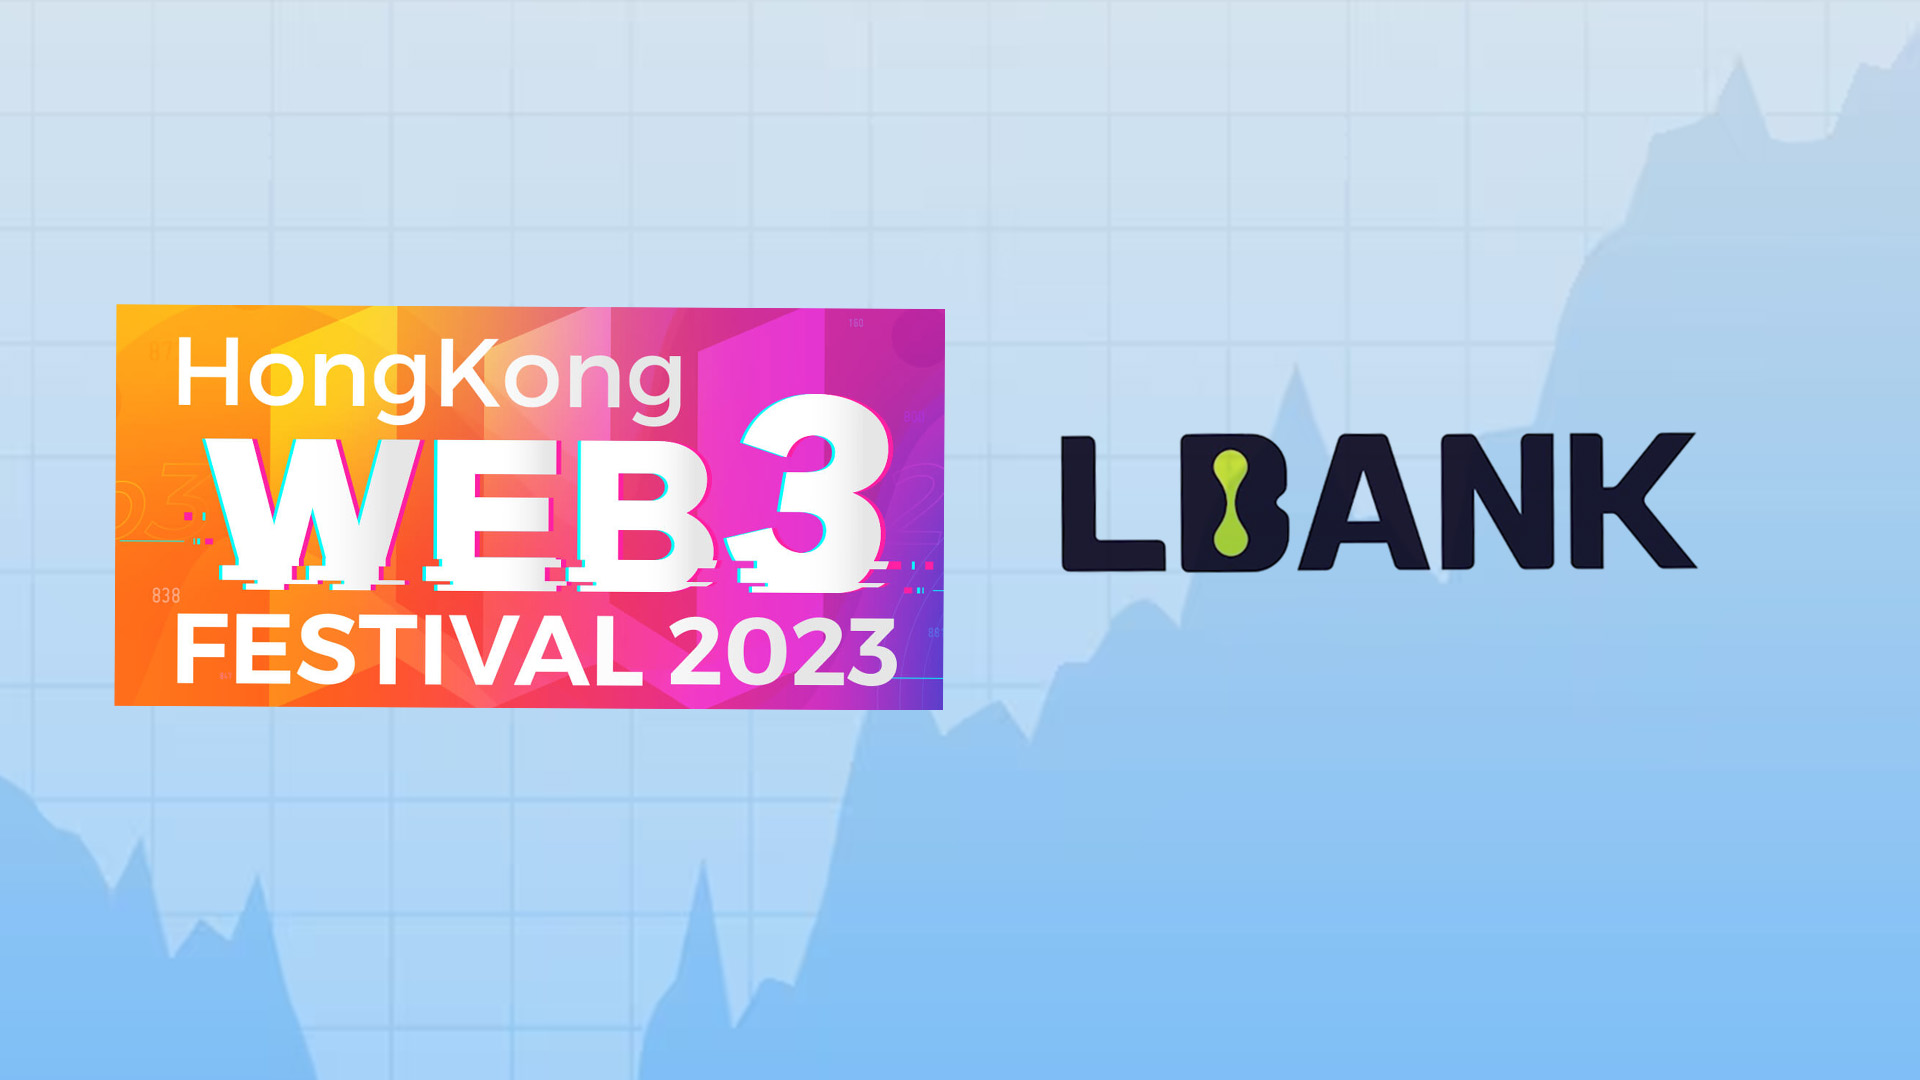 Hong Kong Web3 Festival is back; LBank will host the series event